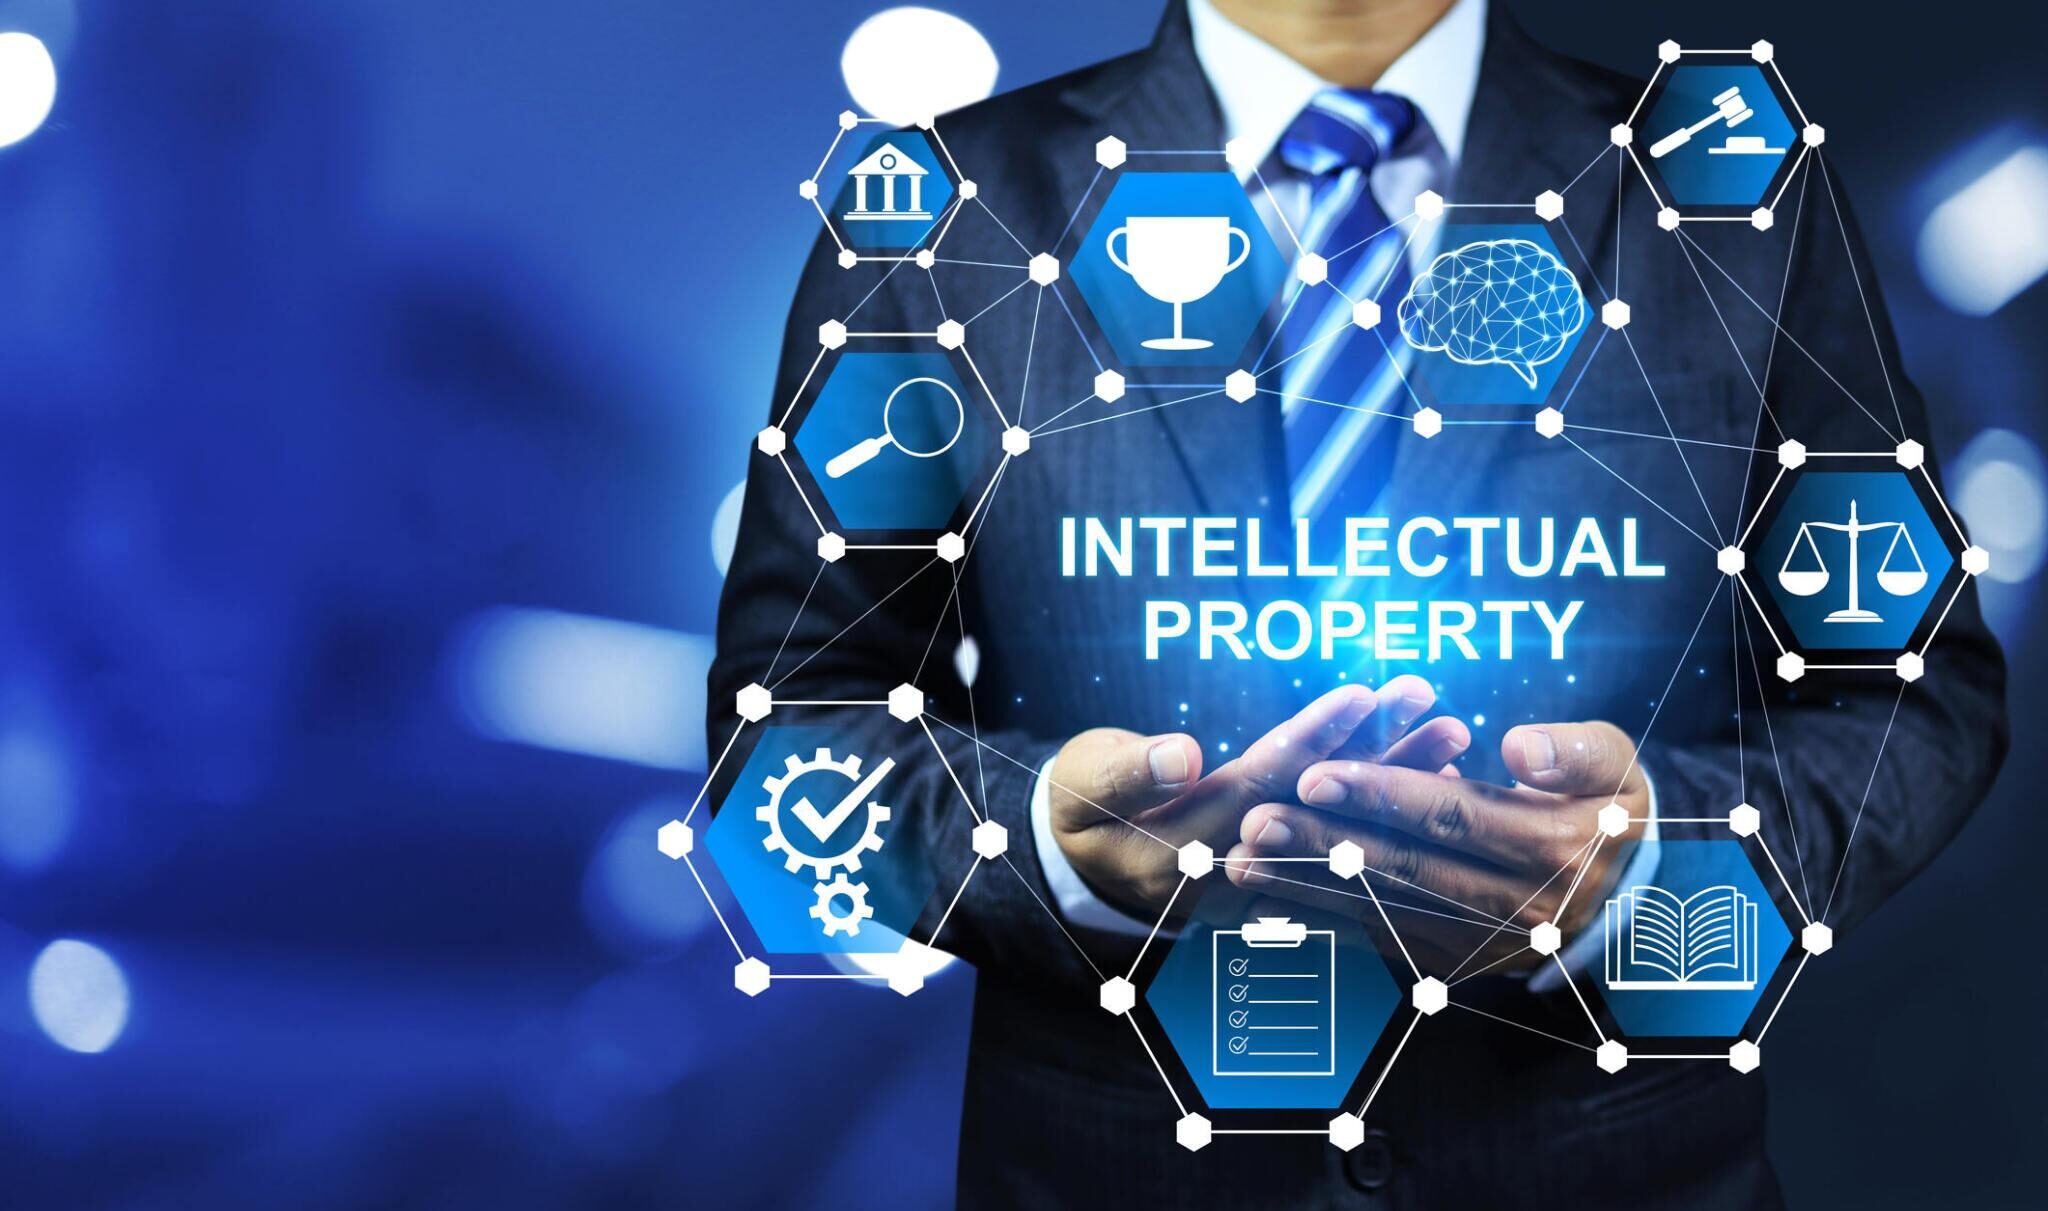 What Is Intellectual Property, and What Are The Types?